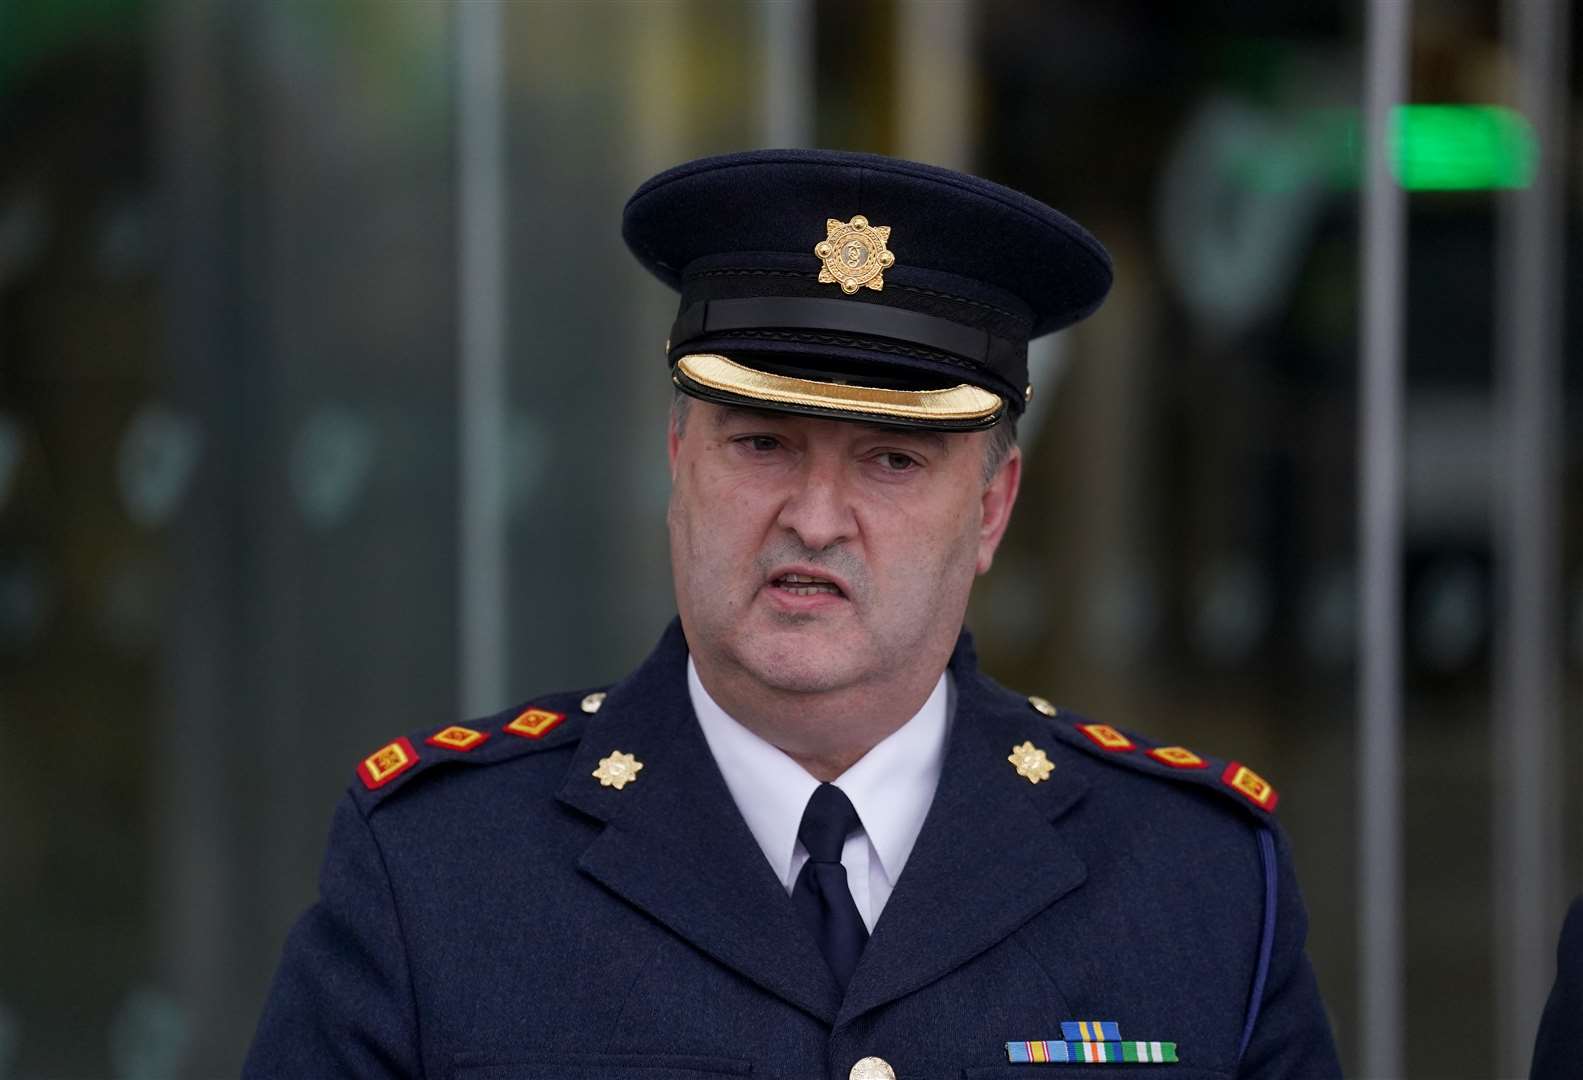 Chief Superintendent Tony Lonergan speaks to the media outside the Central Criminal Court in Dublin (Brian Lawless/PA)